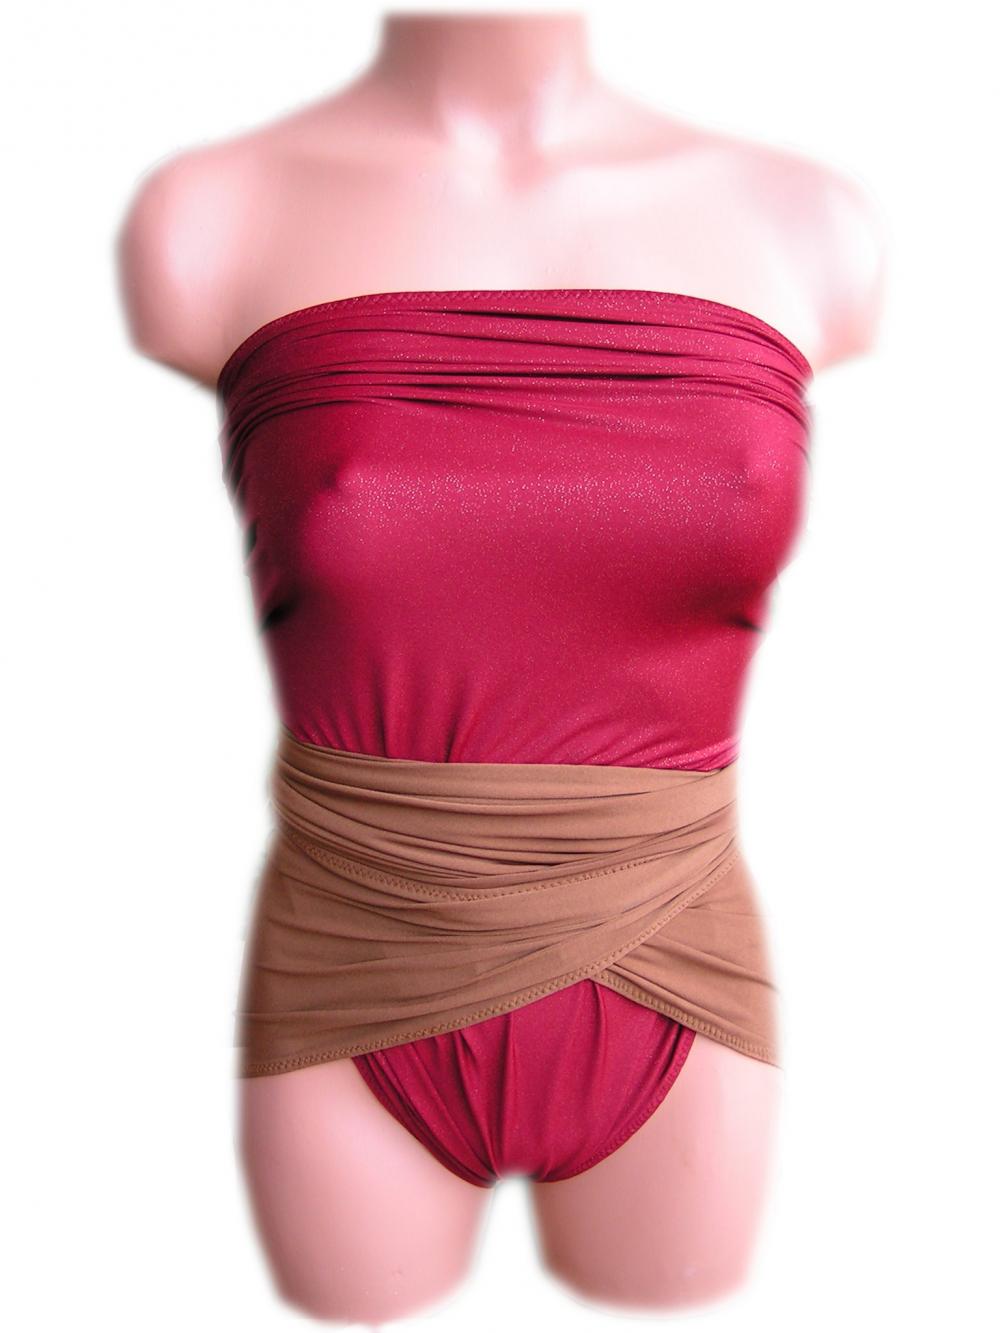 Bathing Suit Medium Wrap Around Swimsuit Wine With Gold Glitter And Copper